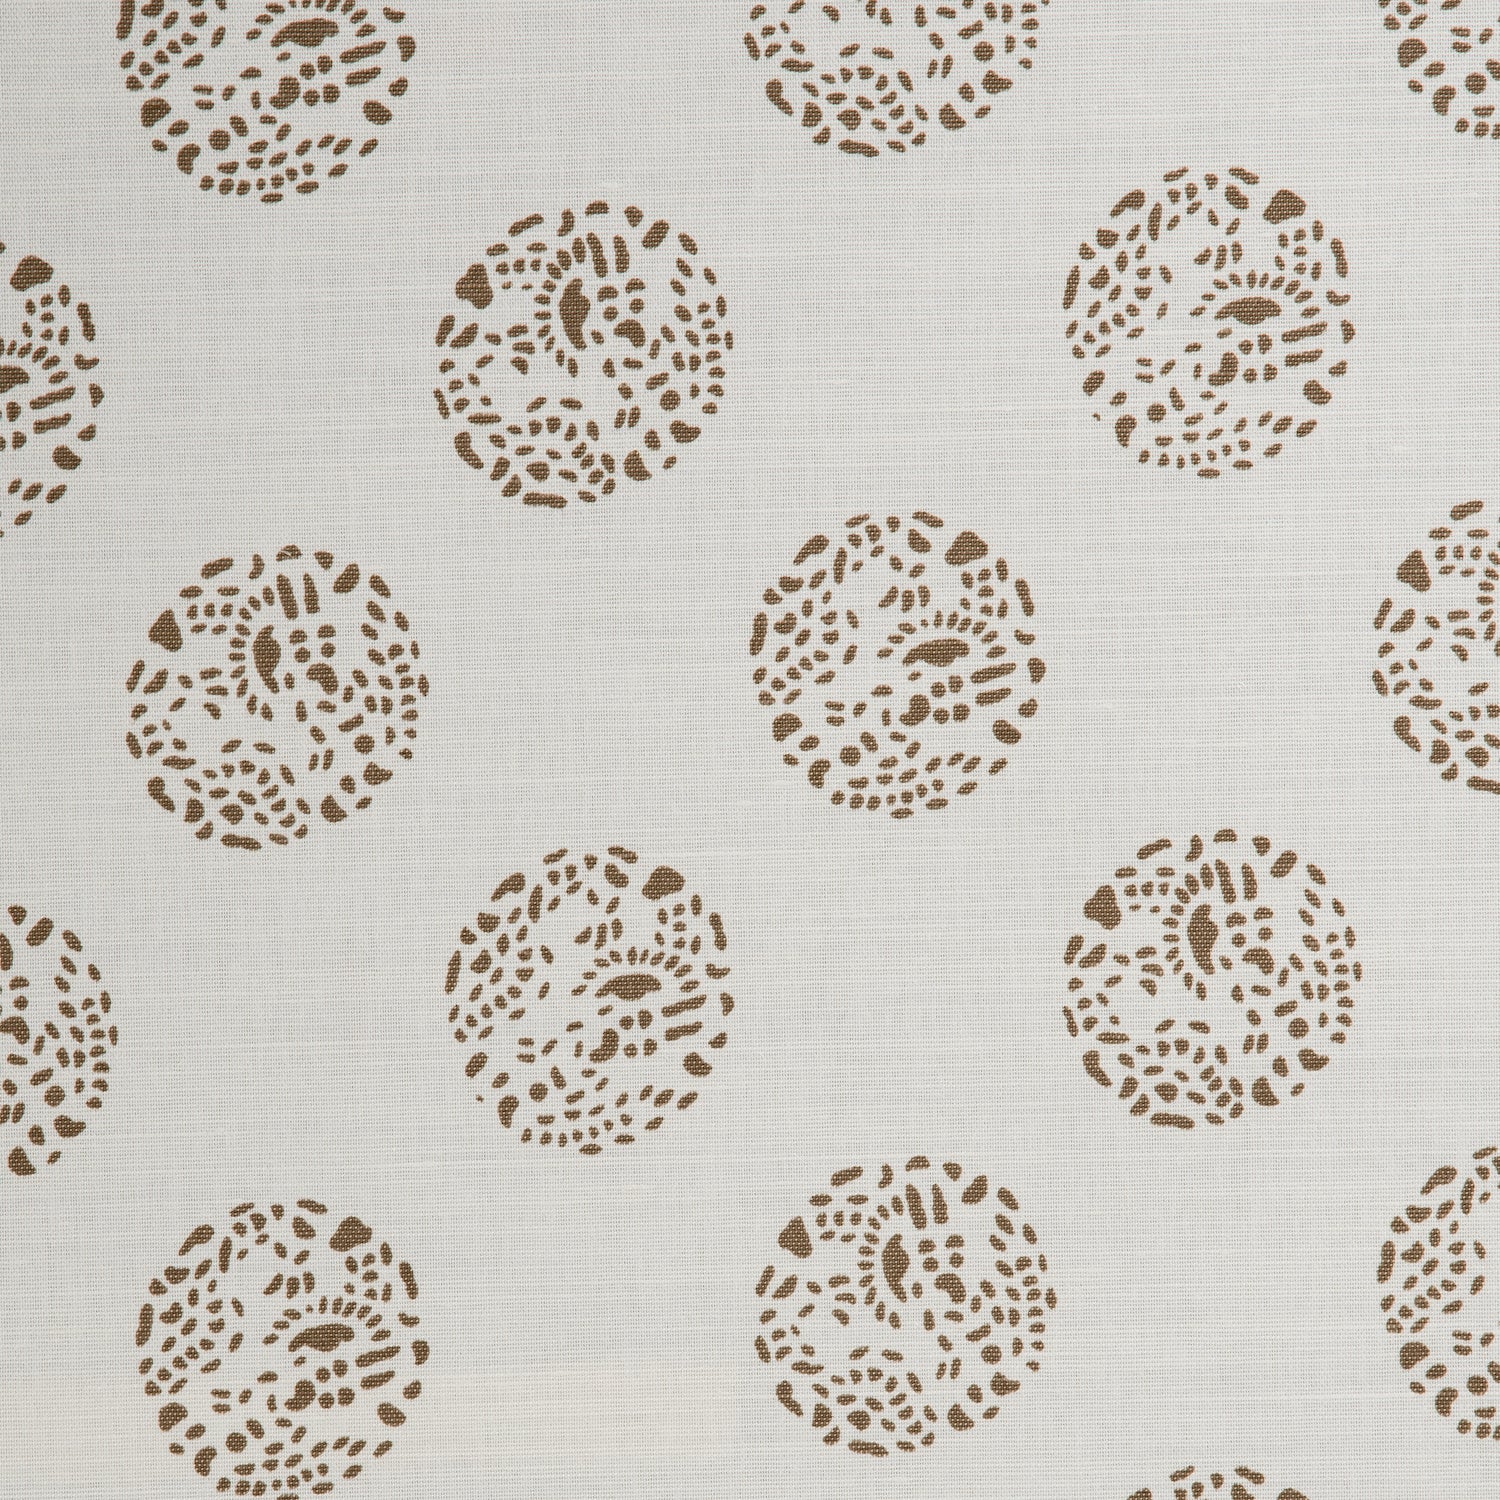 Detail of a printed cotton fabric in a repeating dotted pattern in brown on a cream field.